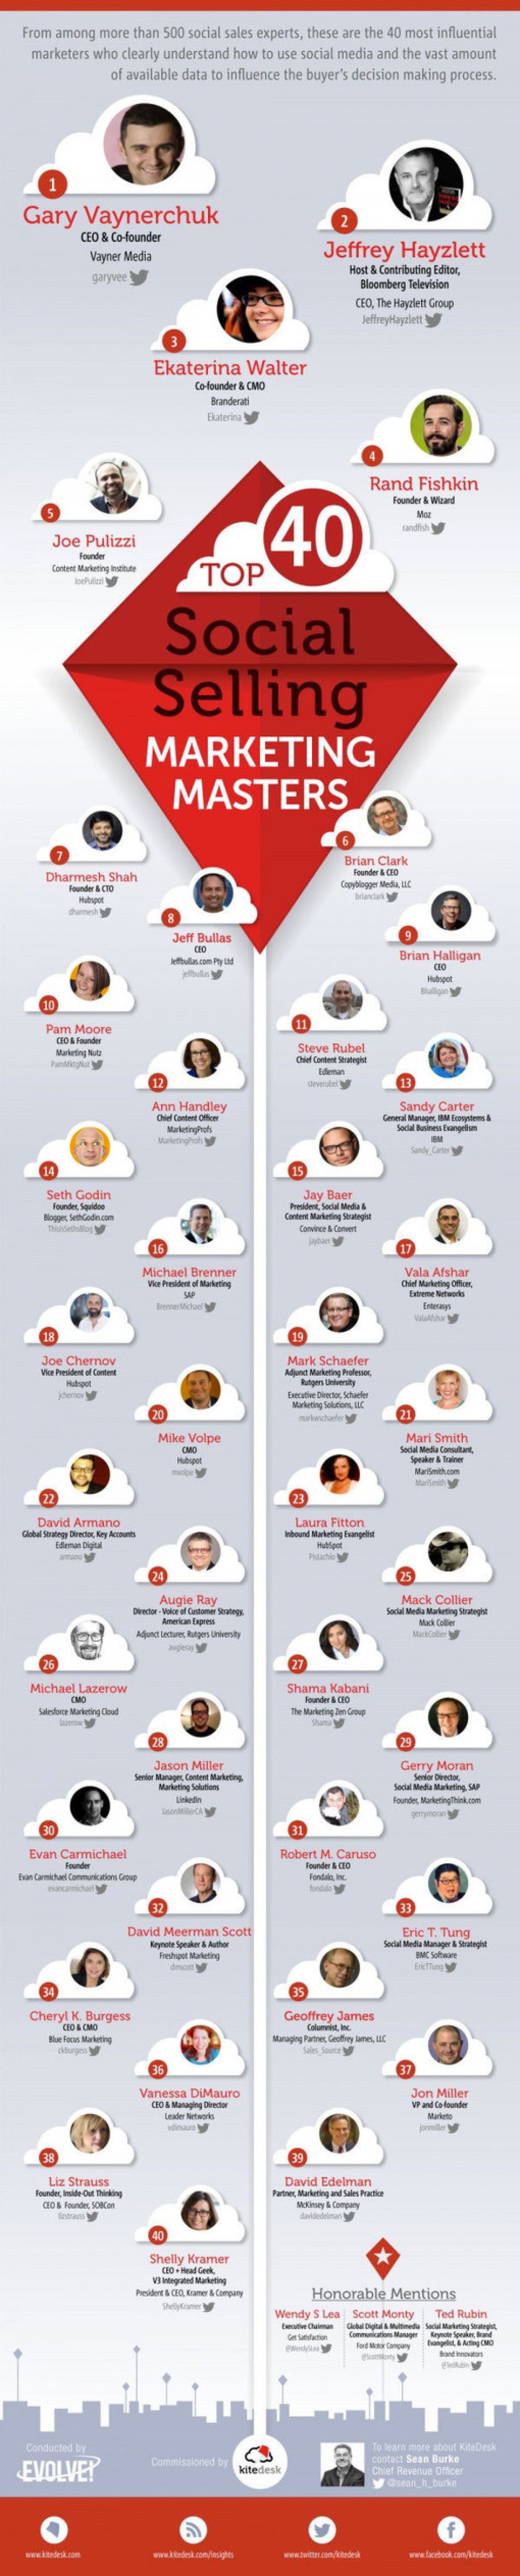 The World's Most Influential Social Media Marketing Masters (Infographic) - Business 2 Community | Content Conversations | Scoop.it